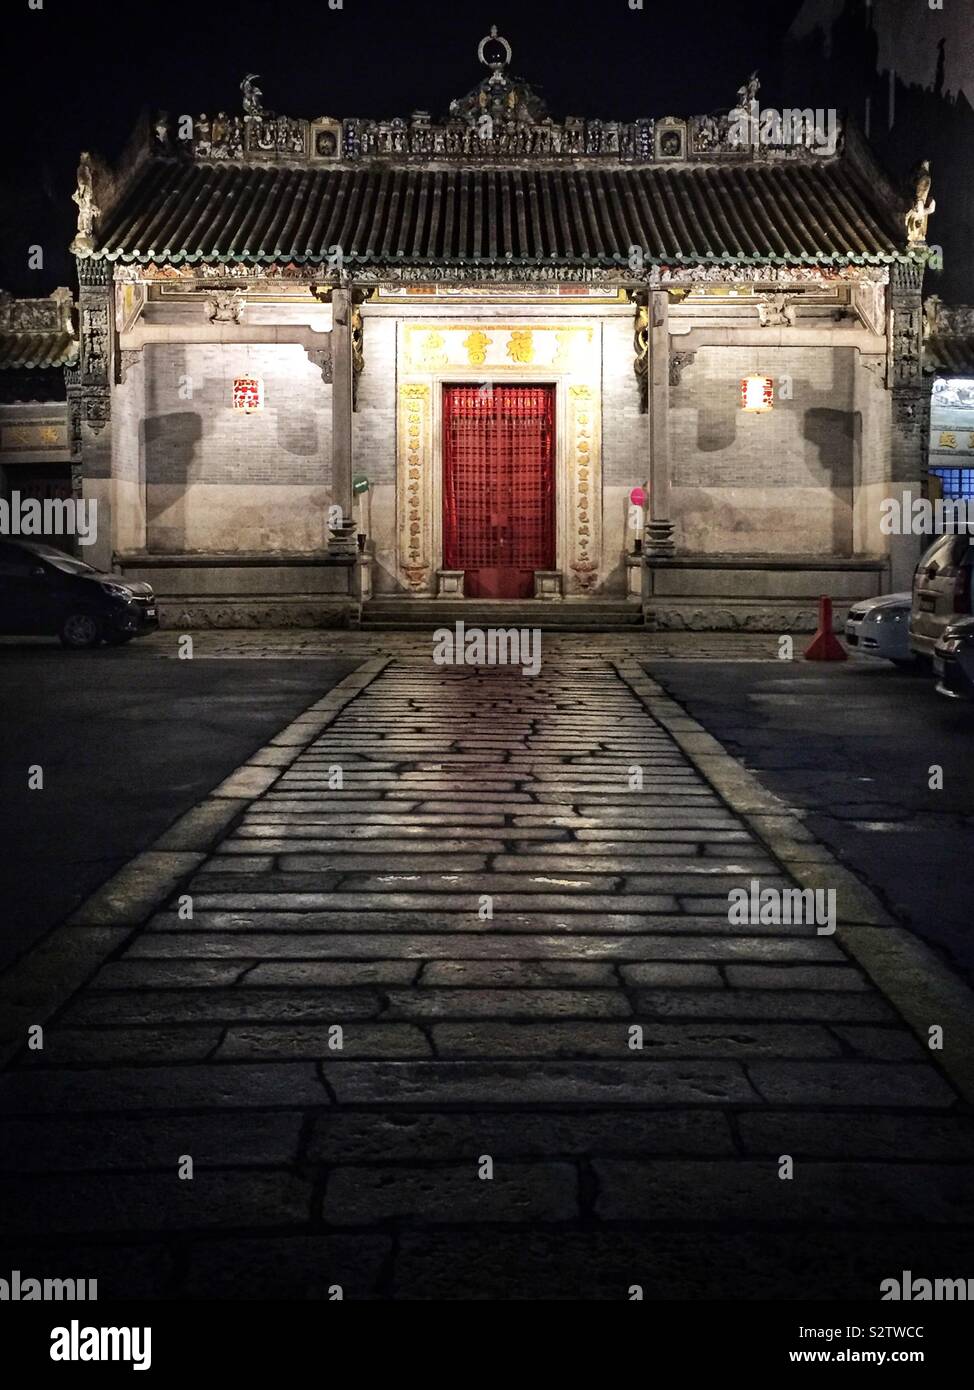 The Ng Fook Thong Temple of the Cantonese Districts Association at night in the Old Town of George Town, Penang, Malaysia Stock Photo